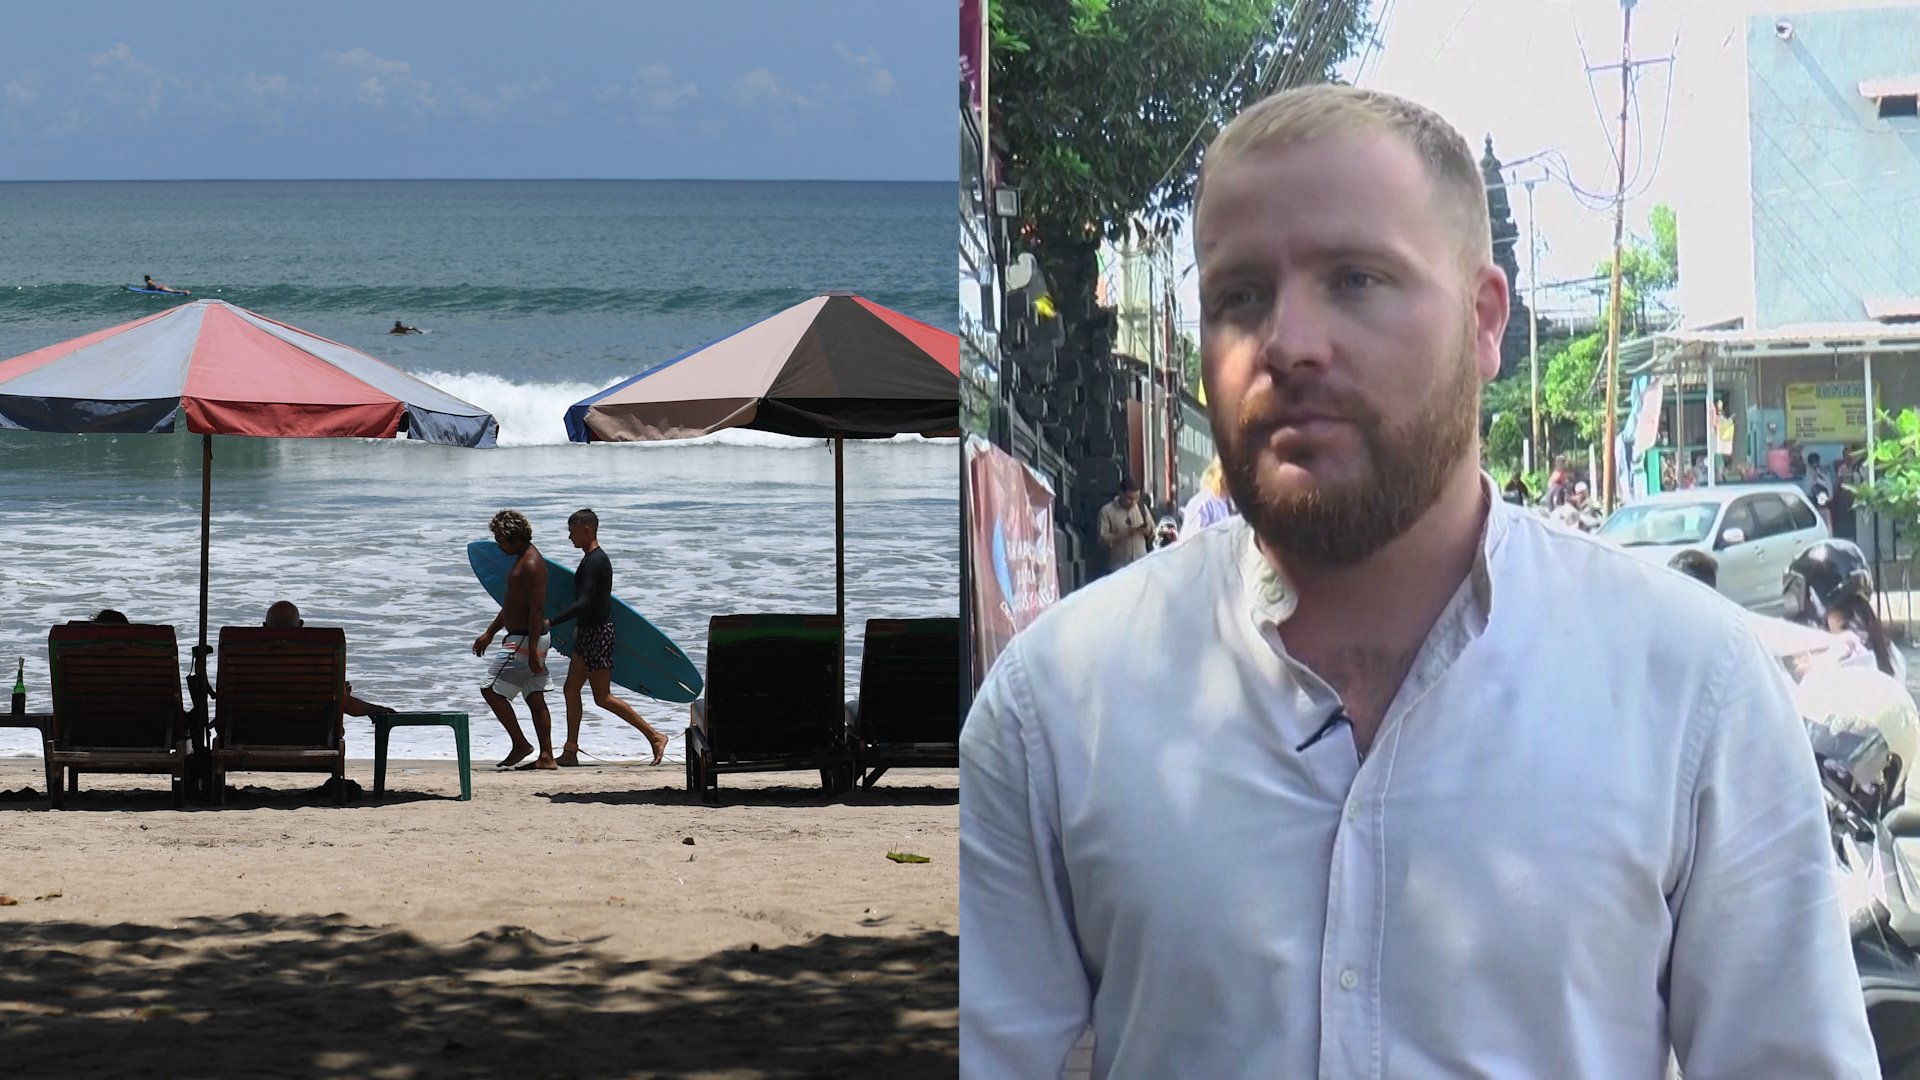 Wife Naked On Public Beach - Danish woman faces 10-year jail term for filming porn video in Bali,  Indonesia | South China Morning Post